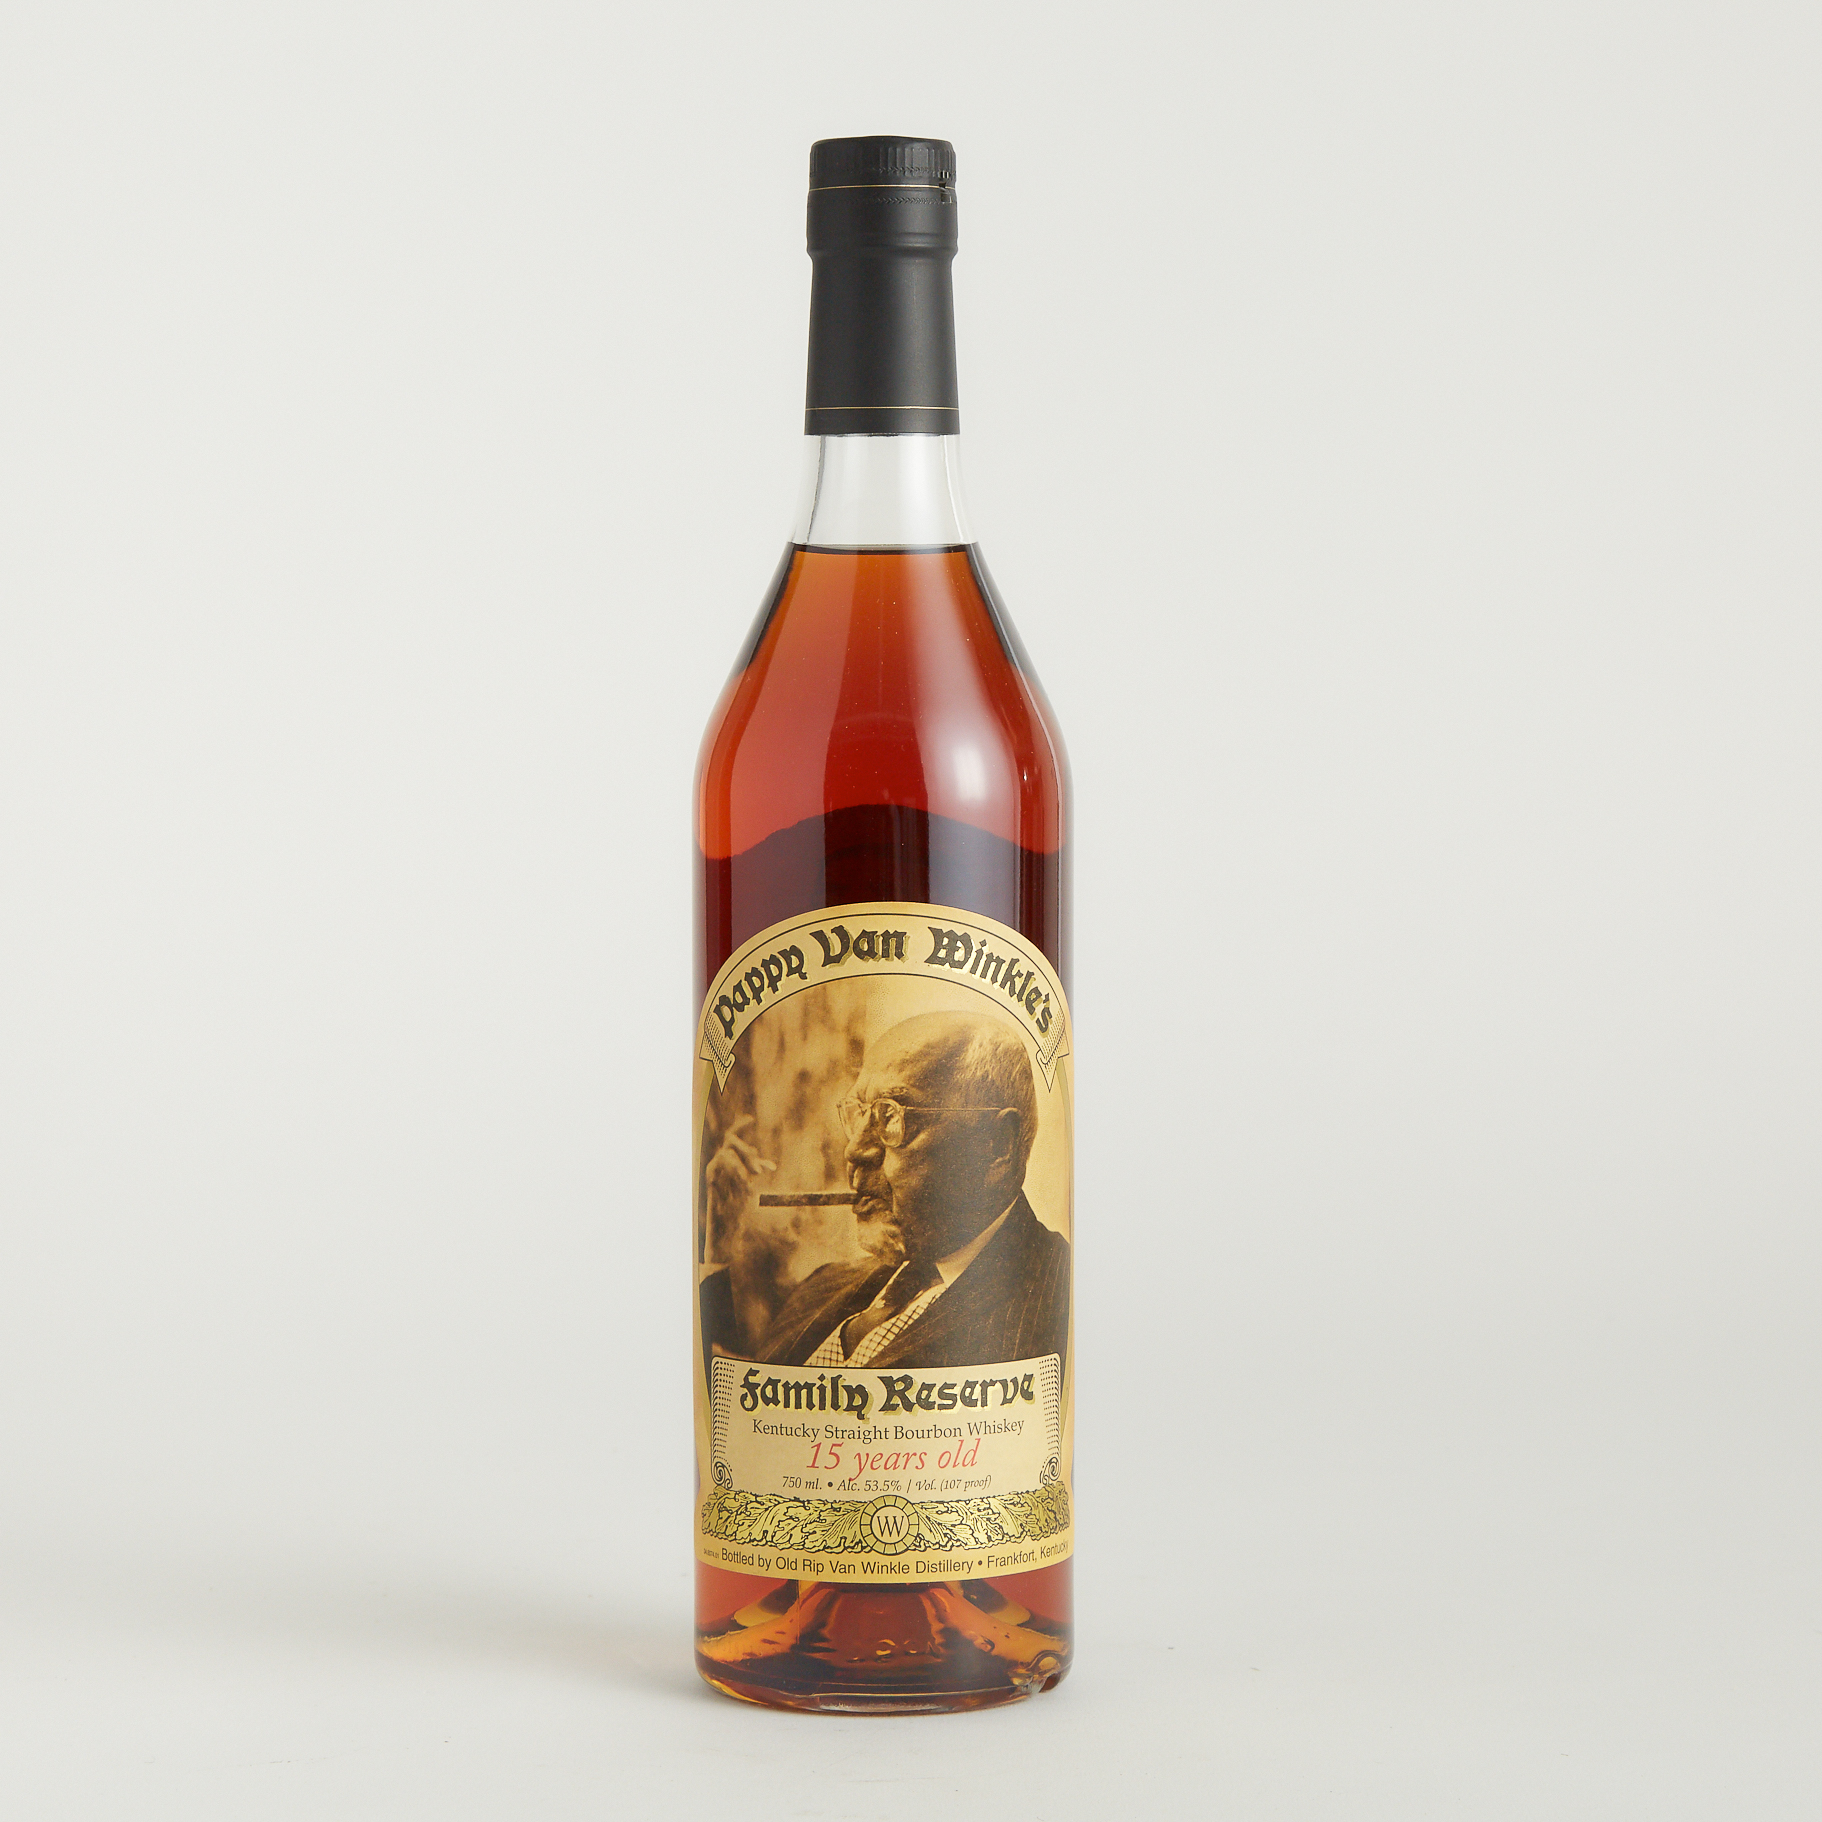 PAPPY VAN WINKLE’S FAMILY RESERVE KENTUCKY STRAIGHT BOURBON WHISKEY 15 YEARS (ONE 750 ML)